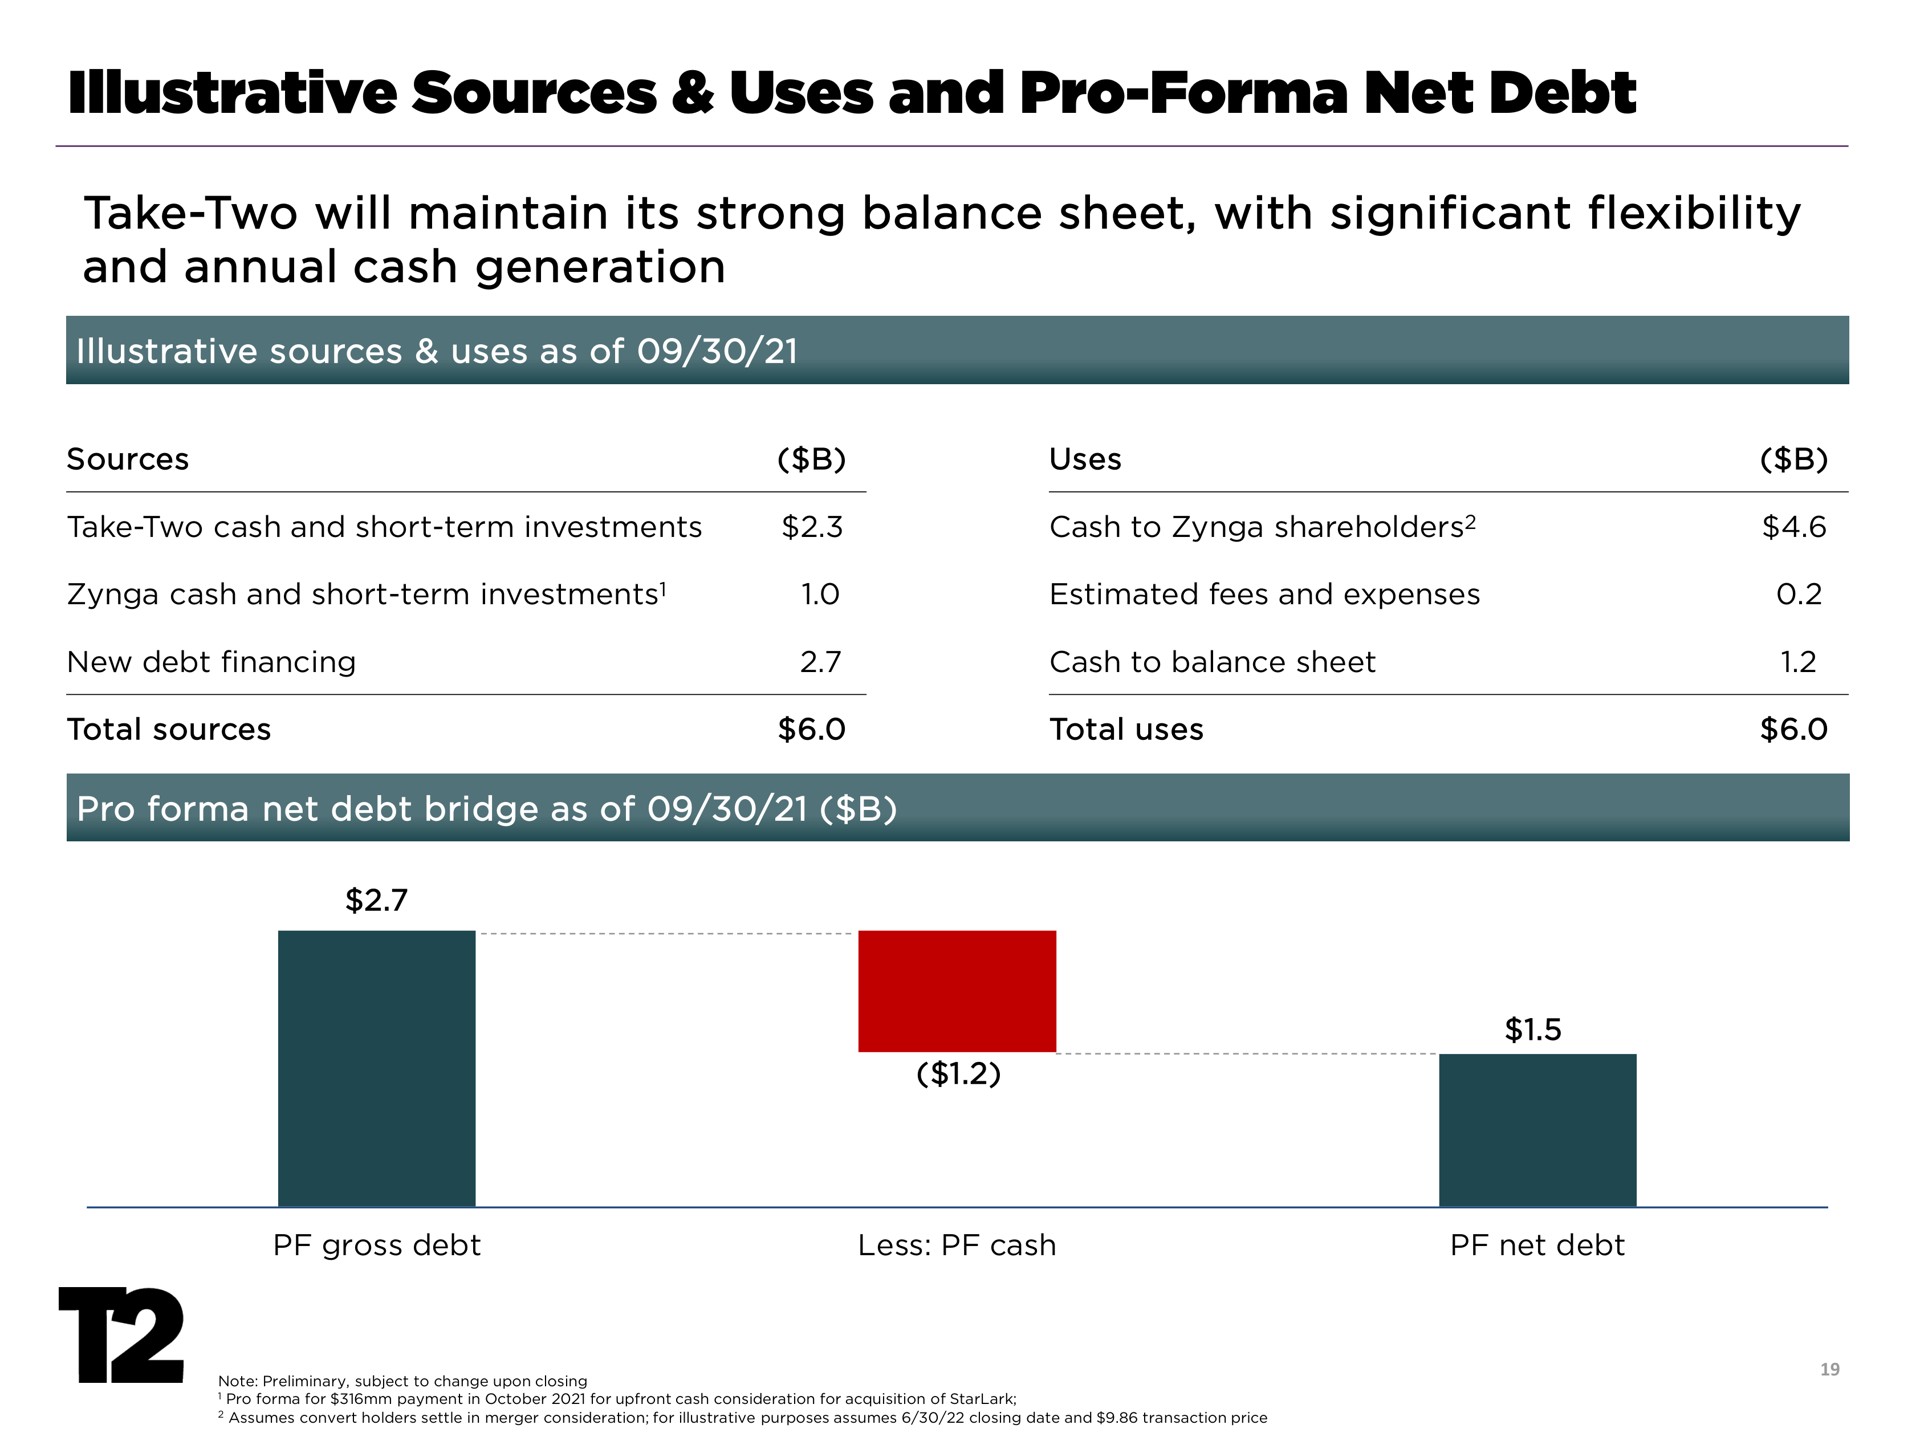 illustrative sources uses and pro net debt | Take-Two Interactive